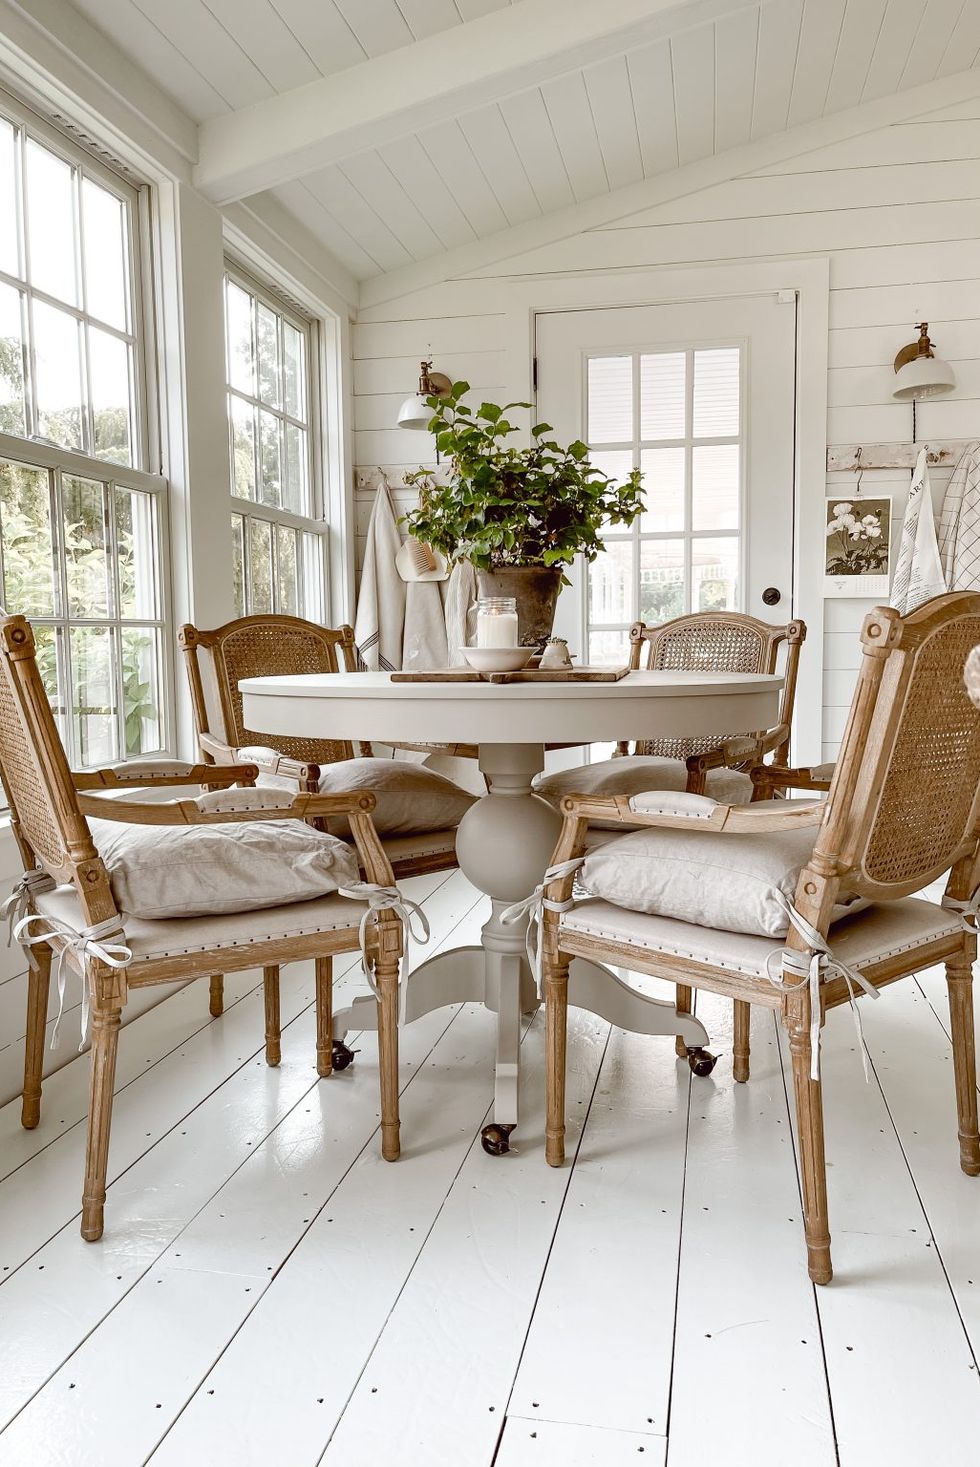 sunroom ideas with a white wooden floor